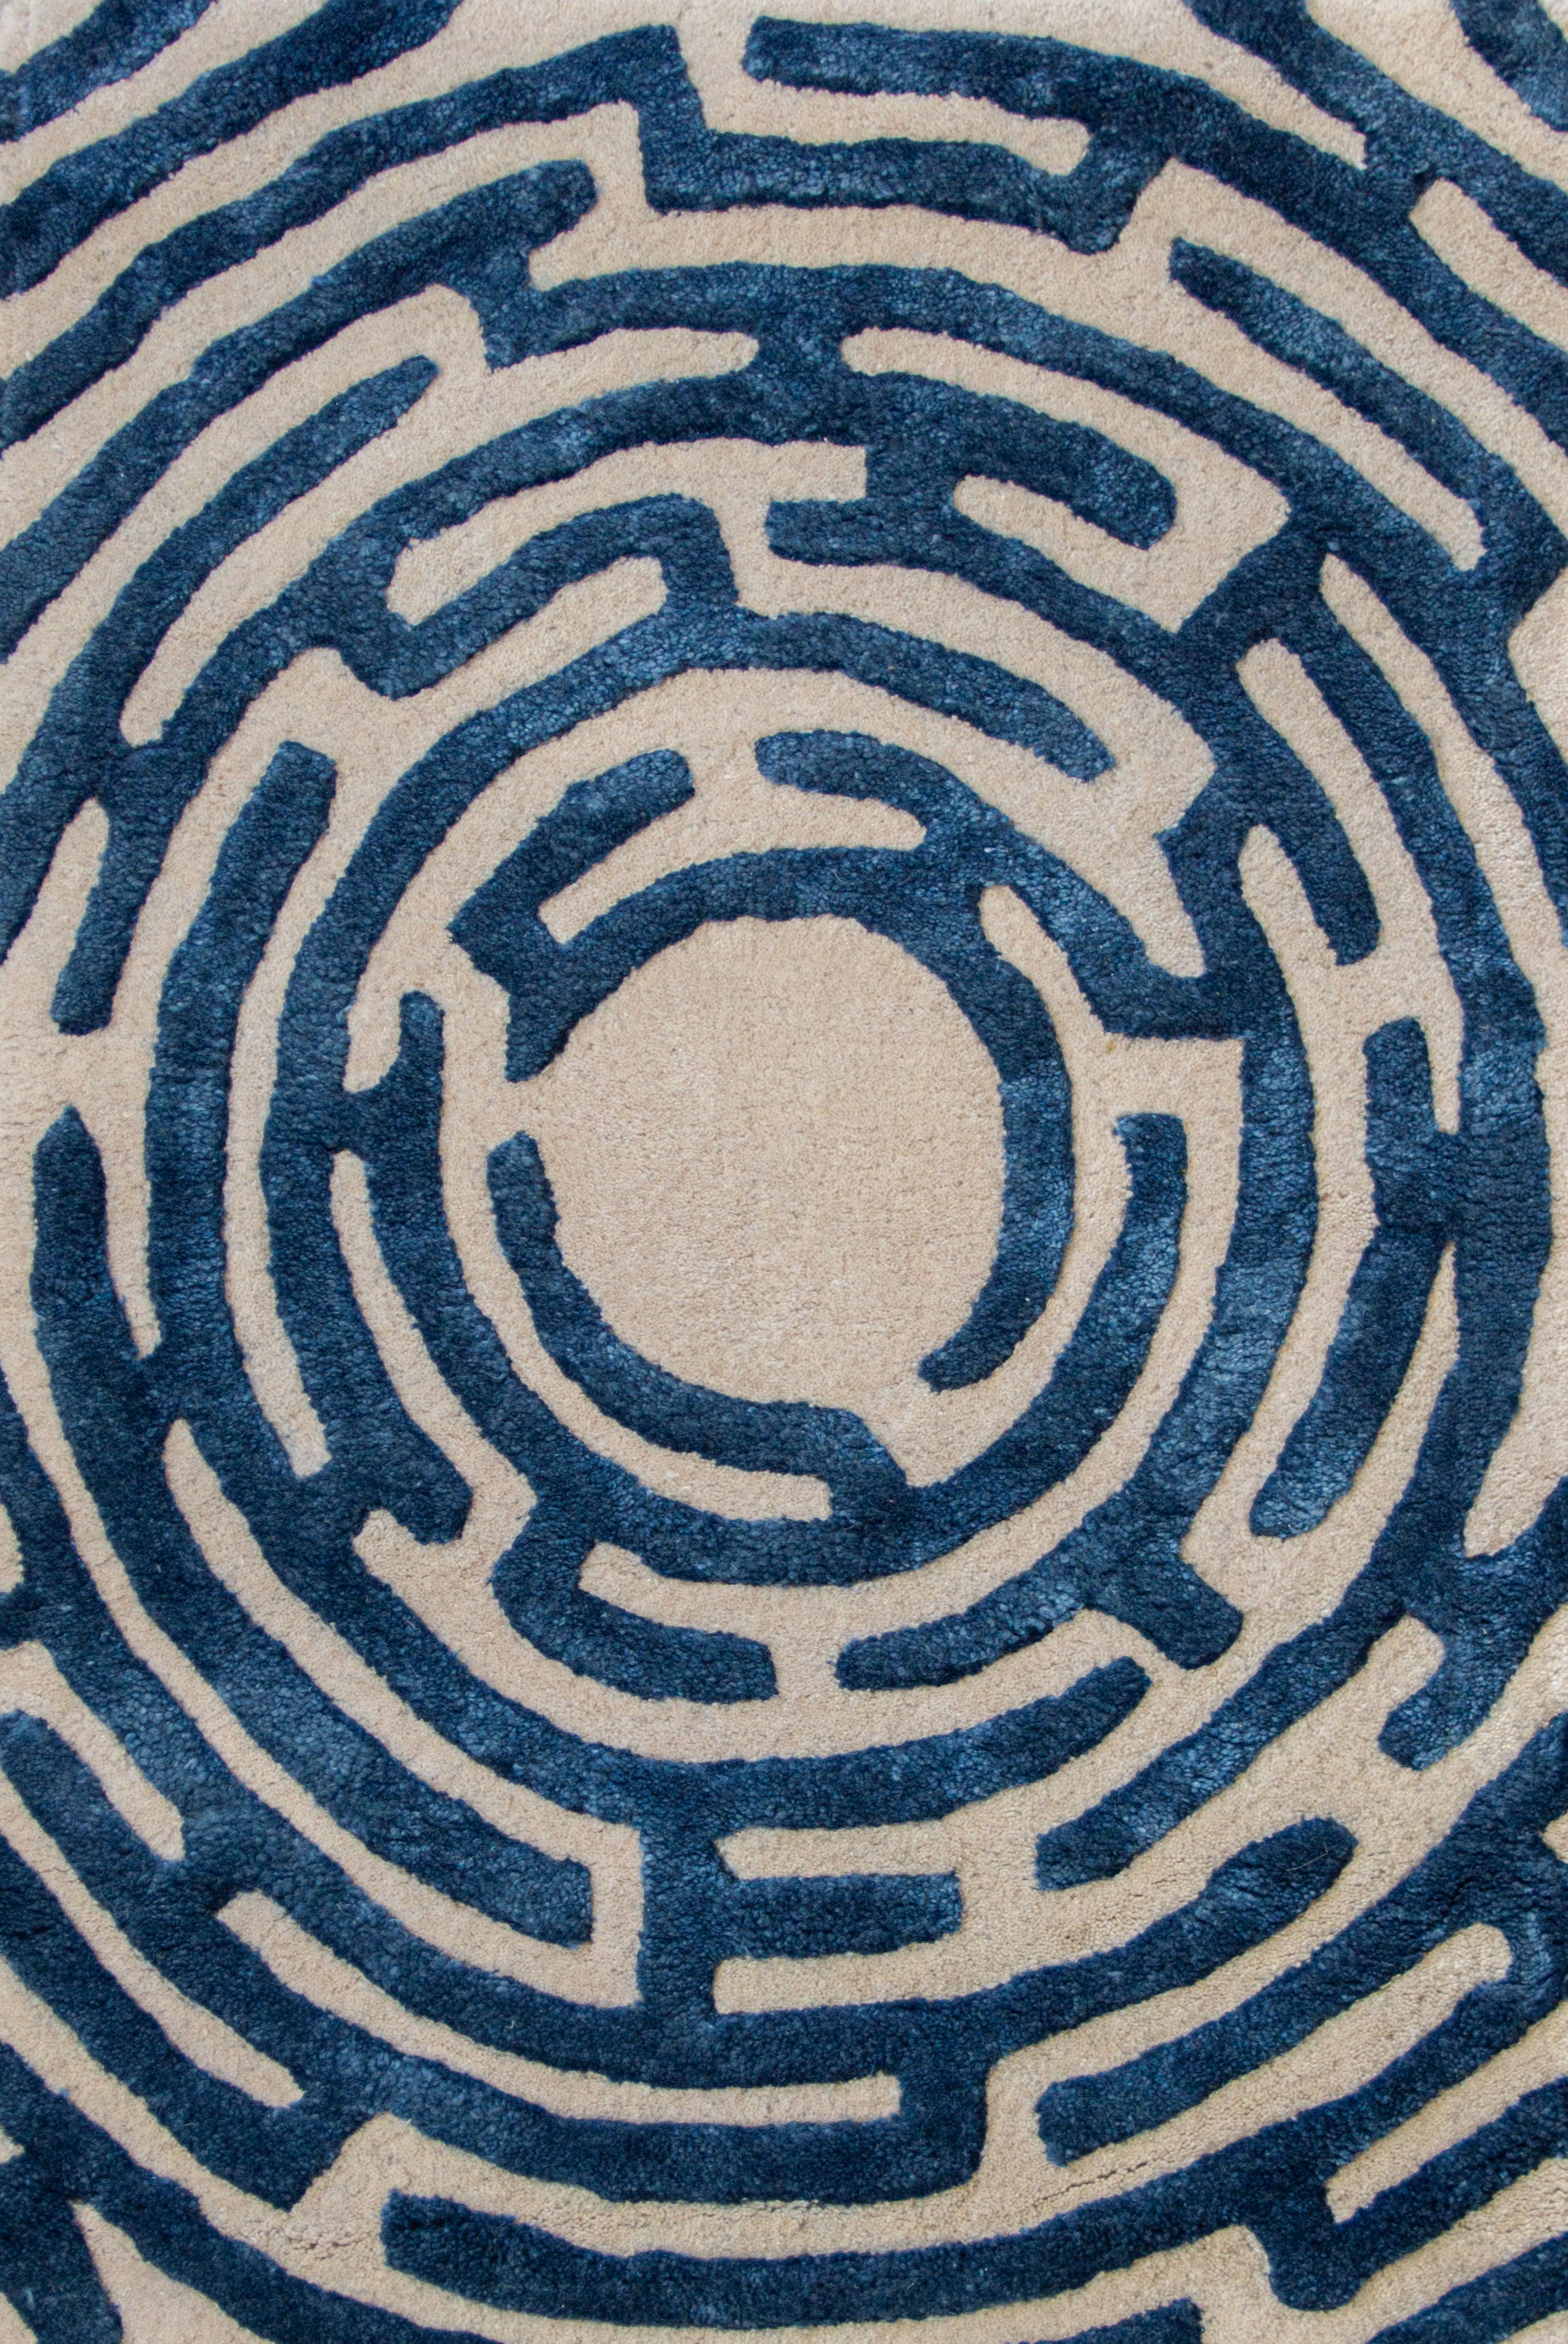 Amiens Hand-Tufted Maze Rug by Kevin Francis Design | Luxury Home Decor